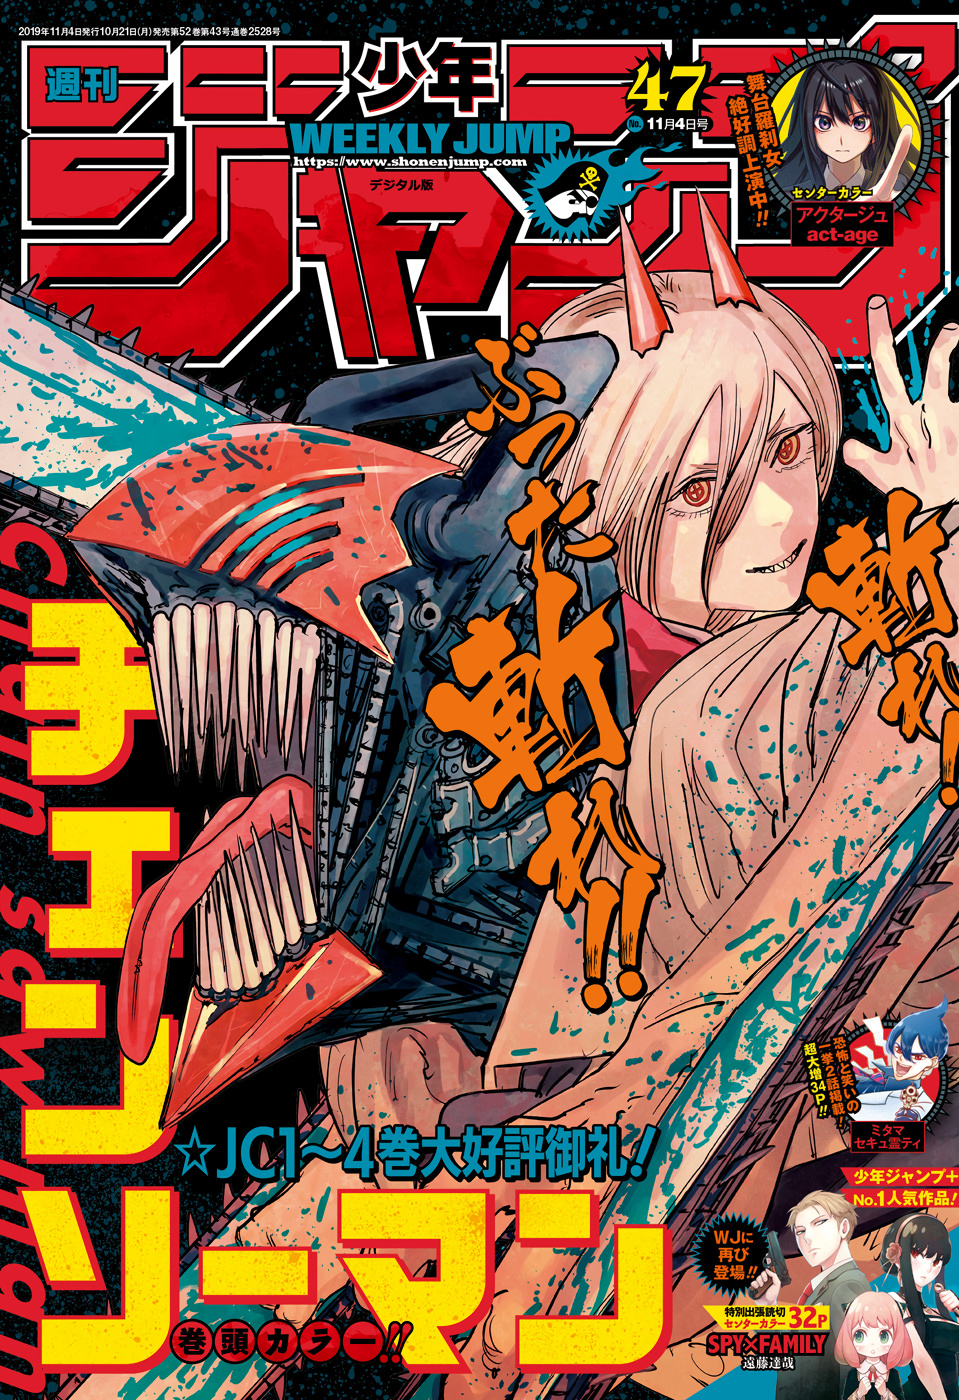 Shonen Jump News on X: Chainsaw Man TV Anime Poster in Issue #45.   / X